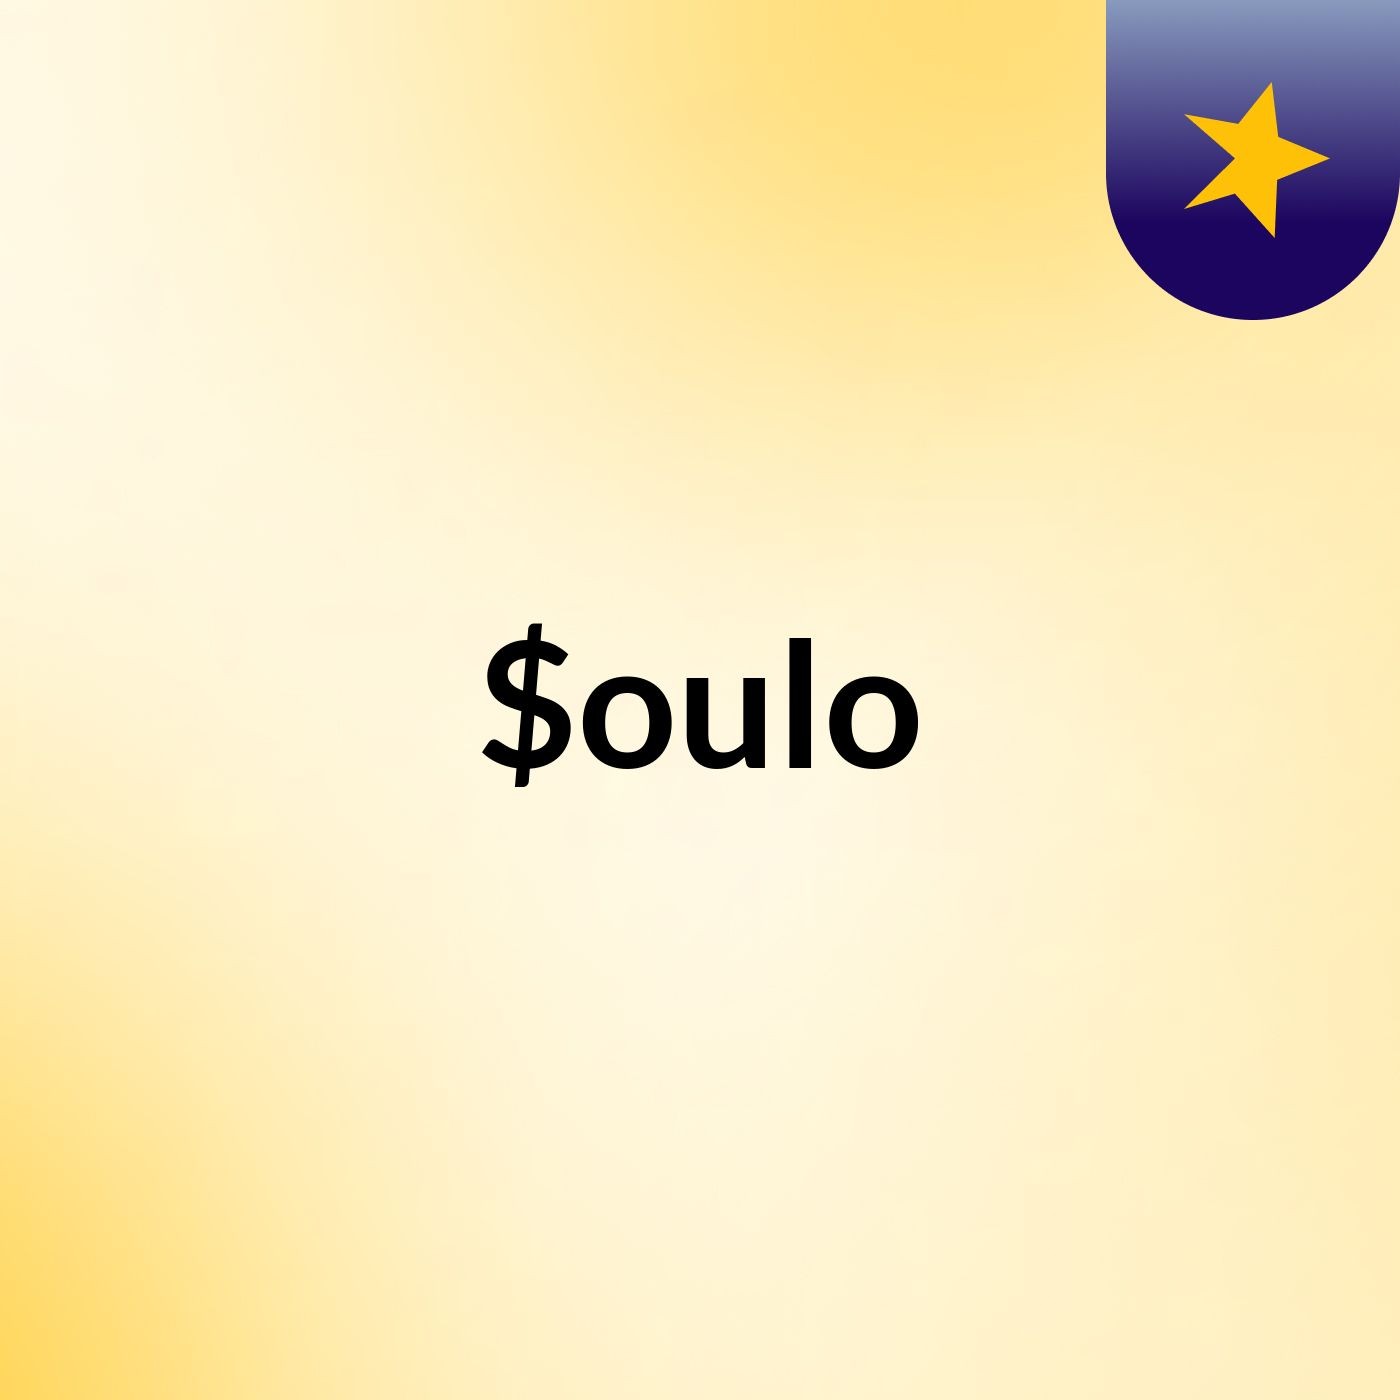 $oulo